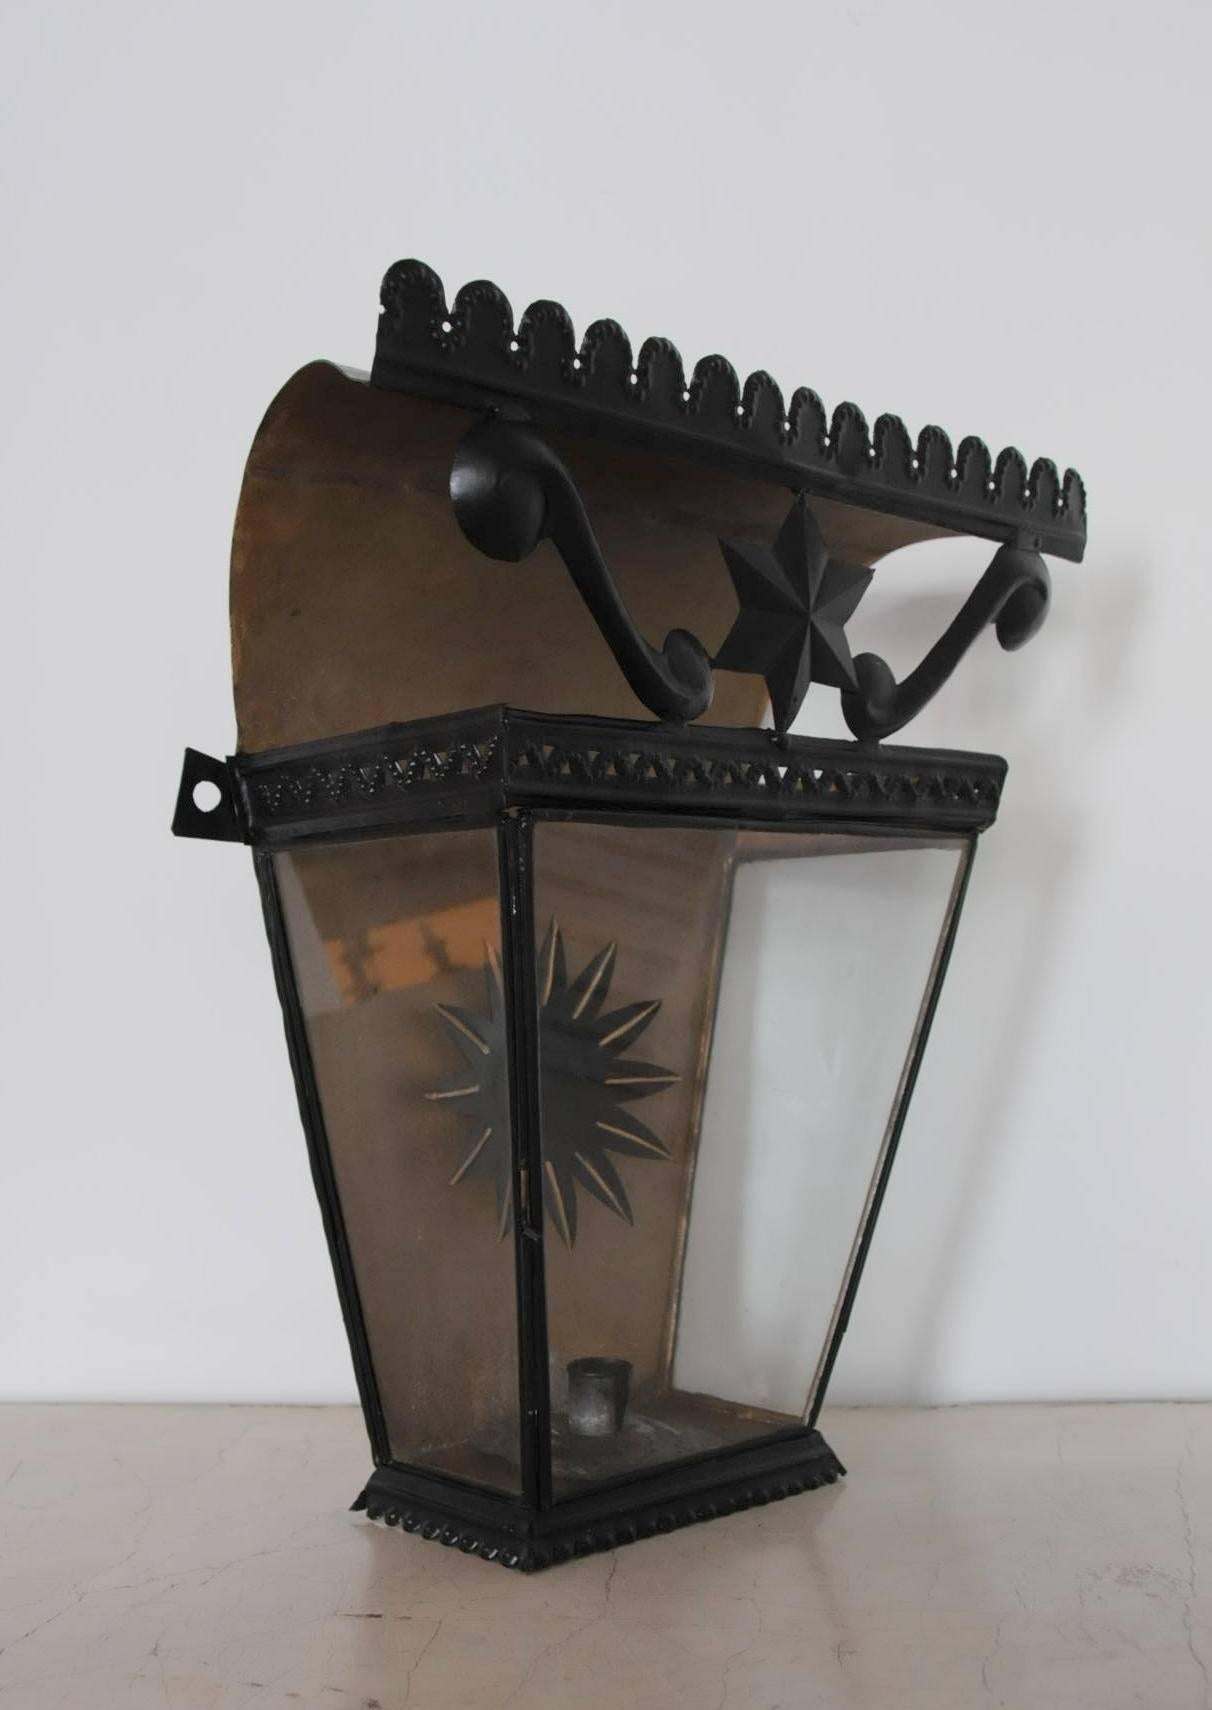 French wall lantern / sconce, origin: France, circa 1860, black tole

Can be electrified. We also sell bespoke, handmade white candles; in custom sizes as well.